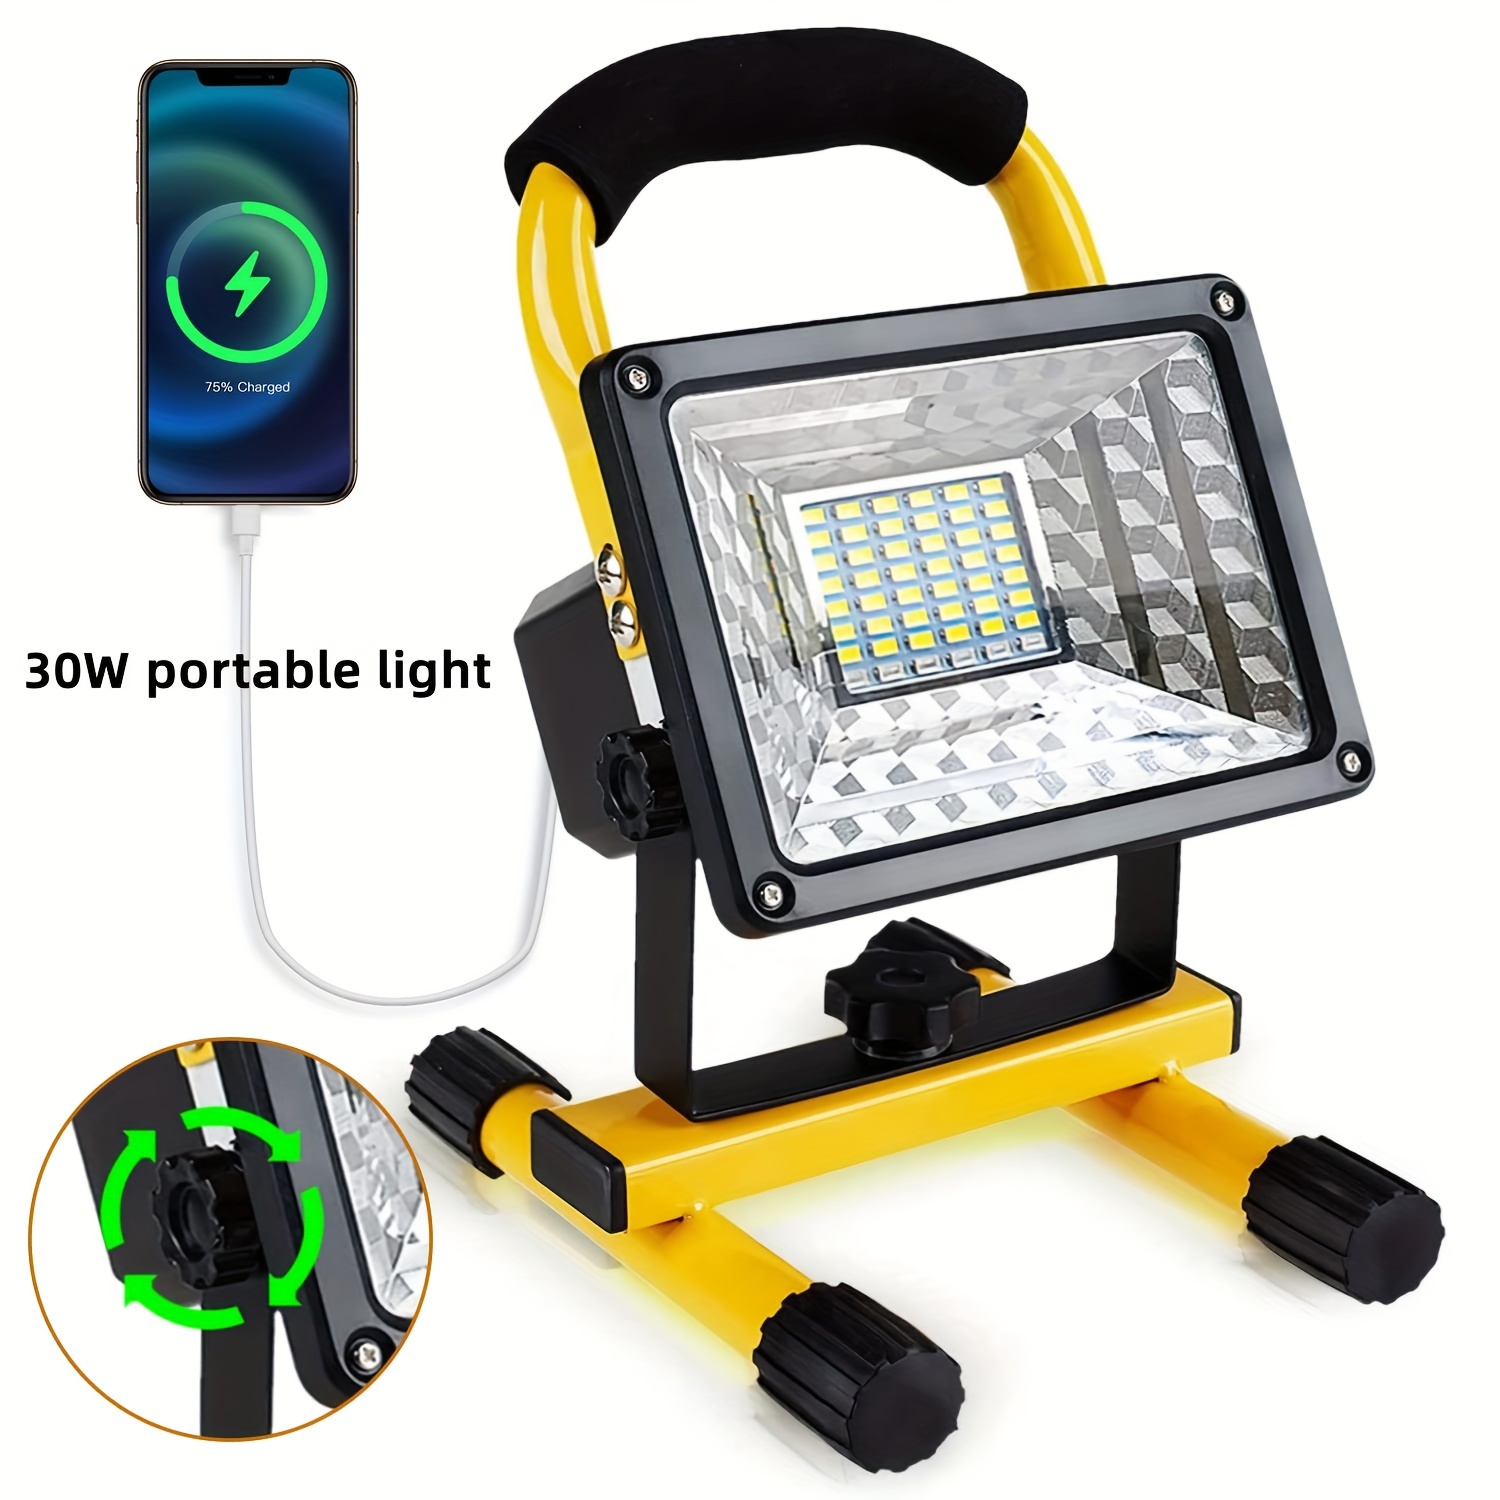 

Portable Led Work Light, Rechargeable Battery Operated, Waterproof Flood Light, Super Bright Cordless Job Site Worklight Fortrouble Emergency Workshop Shop Outdoor Lighting